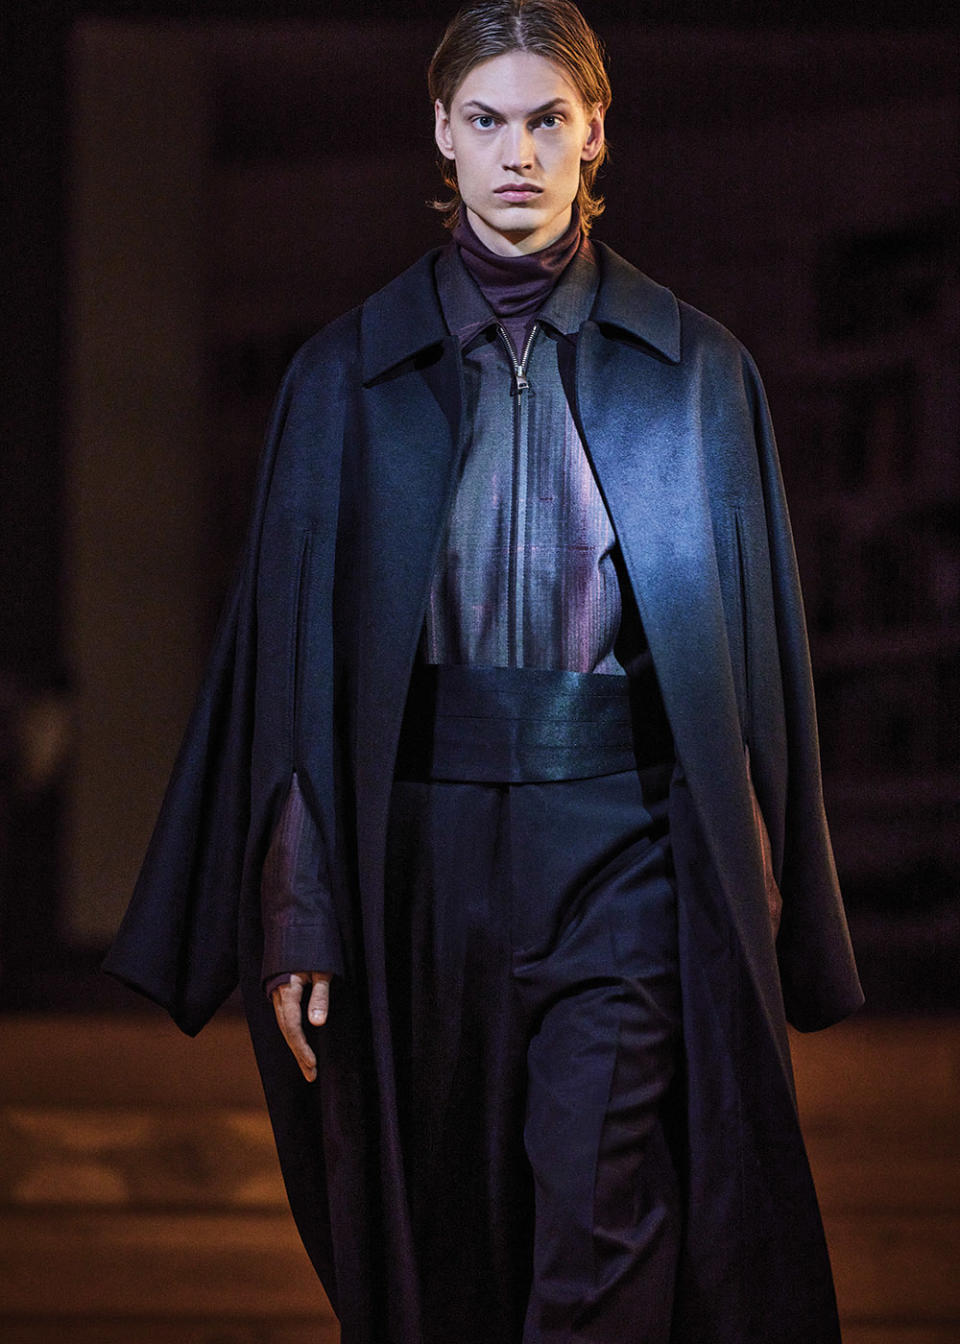 Looks from Zegna’s Red Carpet Collection include a cashmere cloak coat worn over a bomber jacket